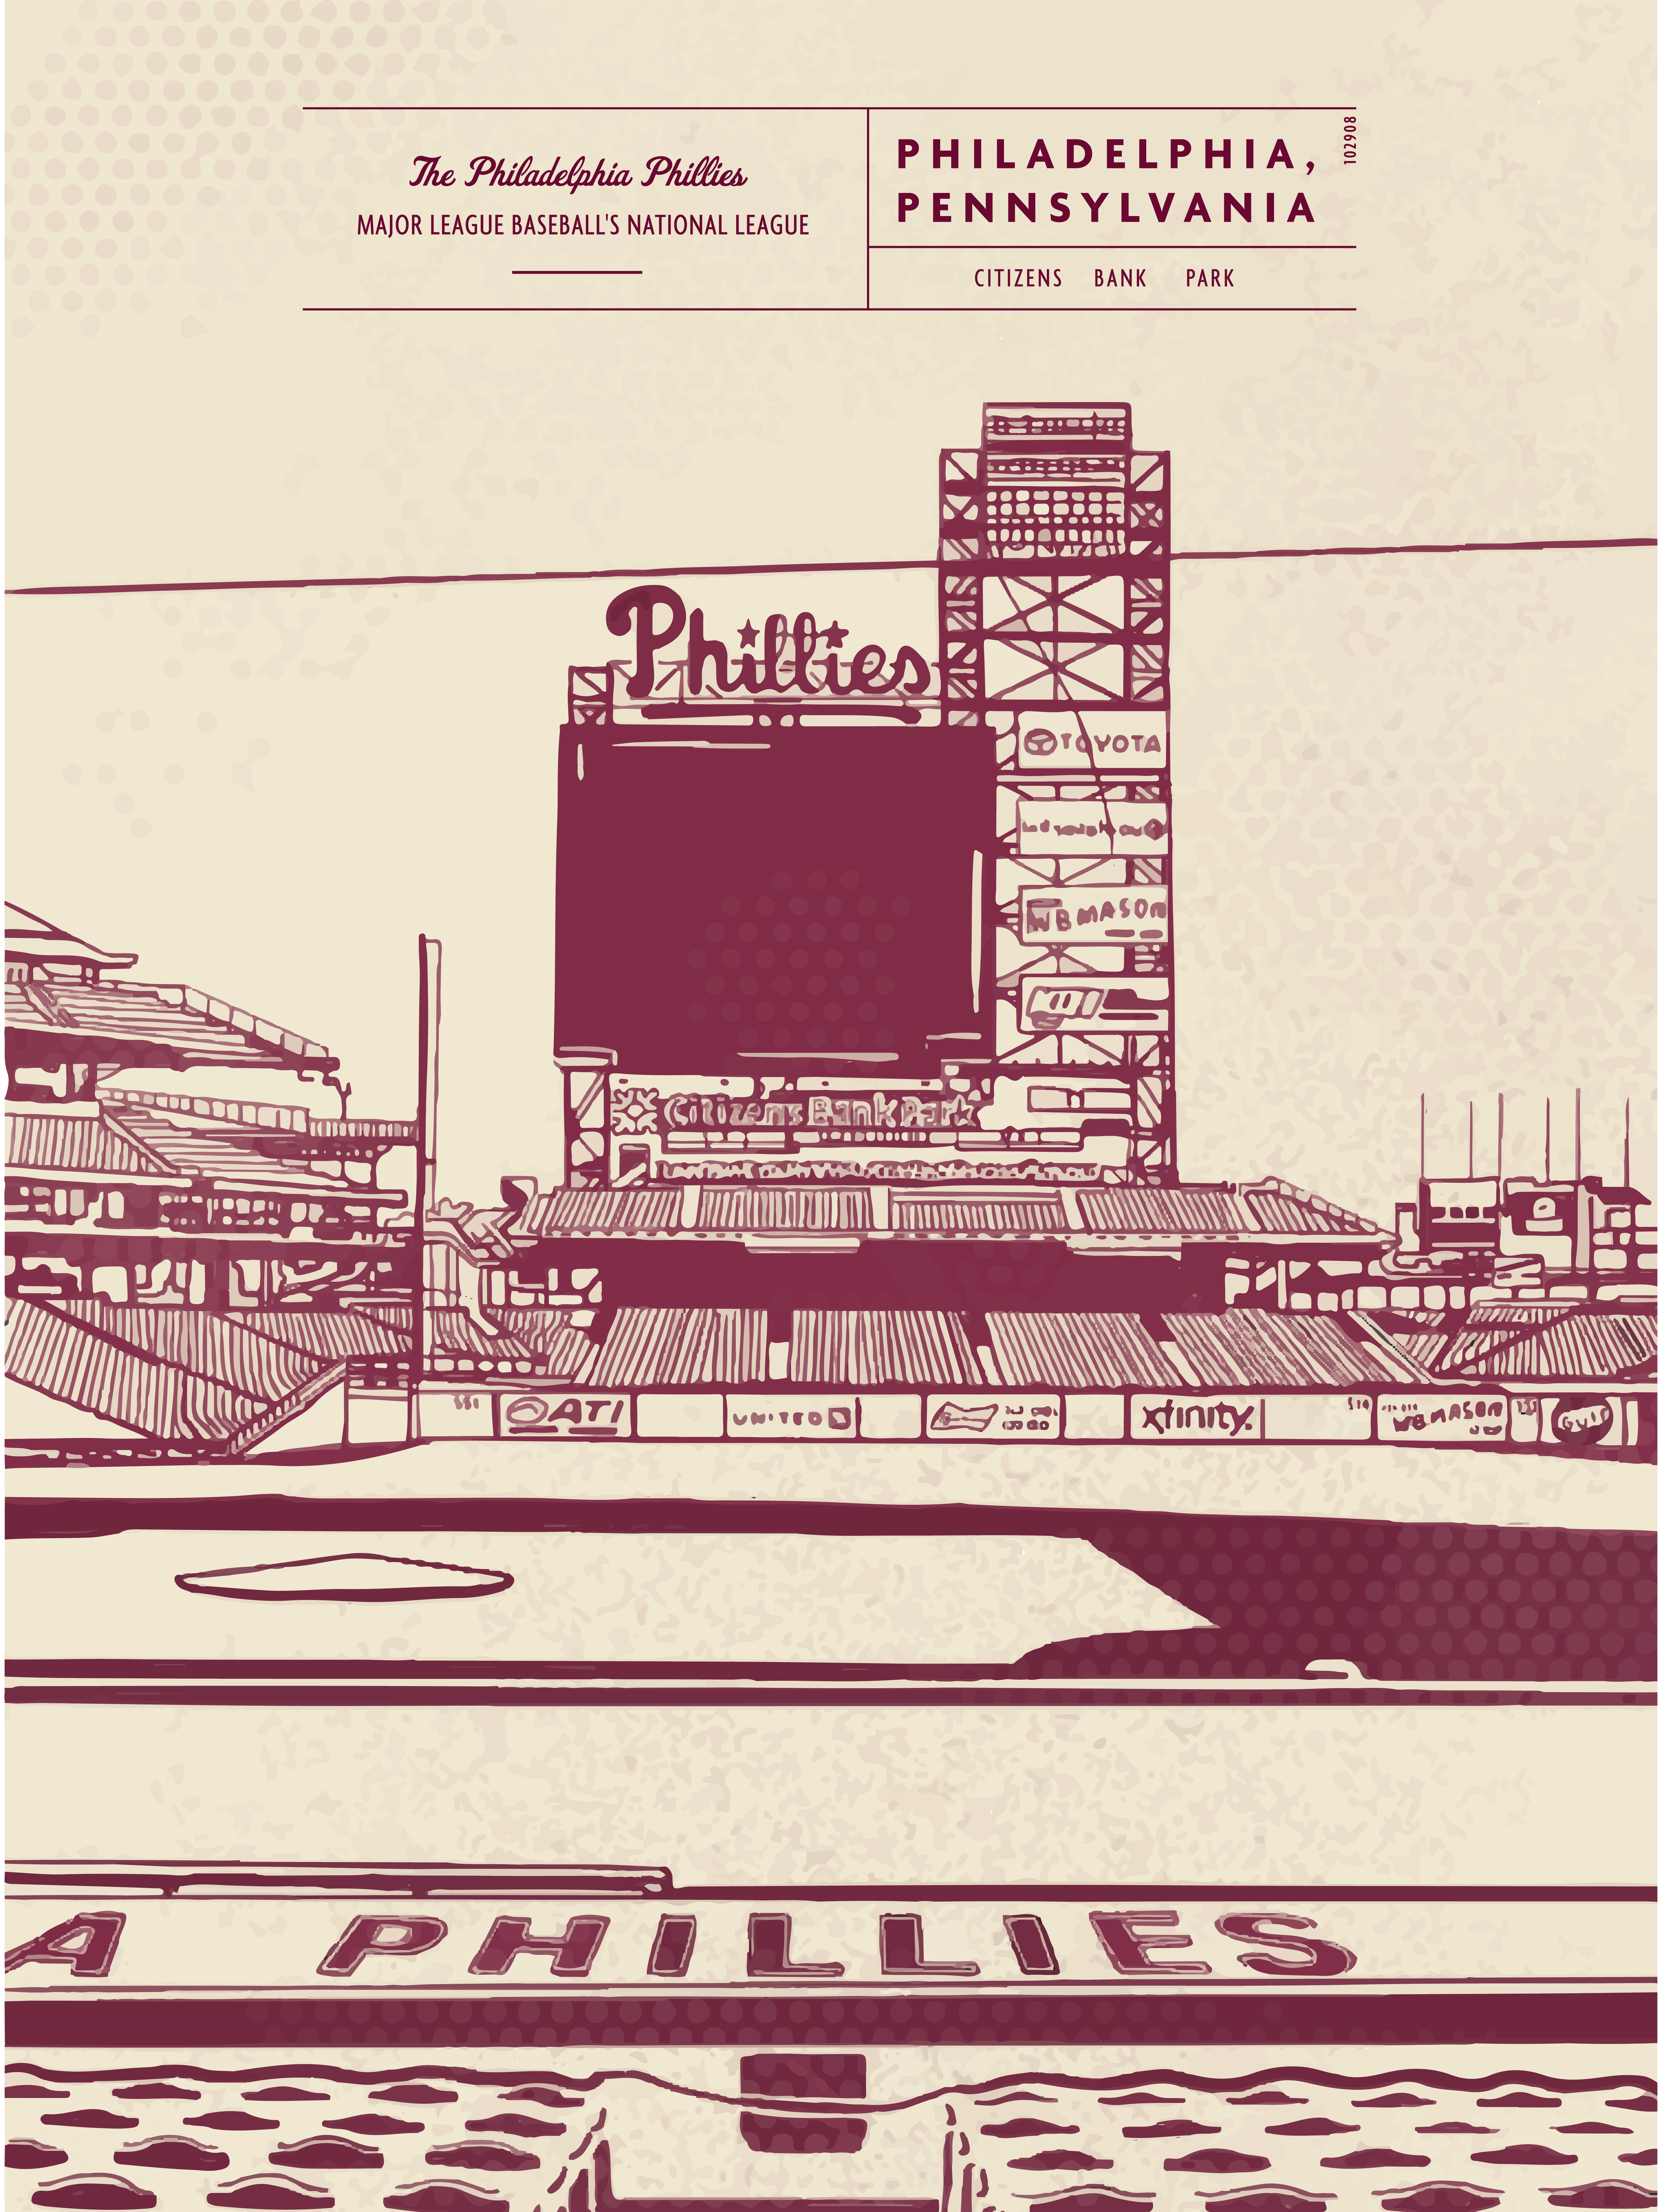 Phillies-for-print-01